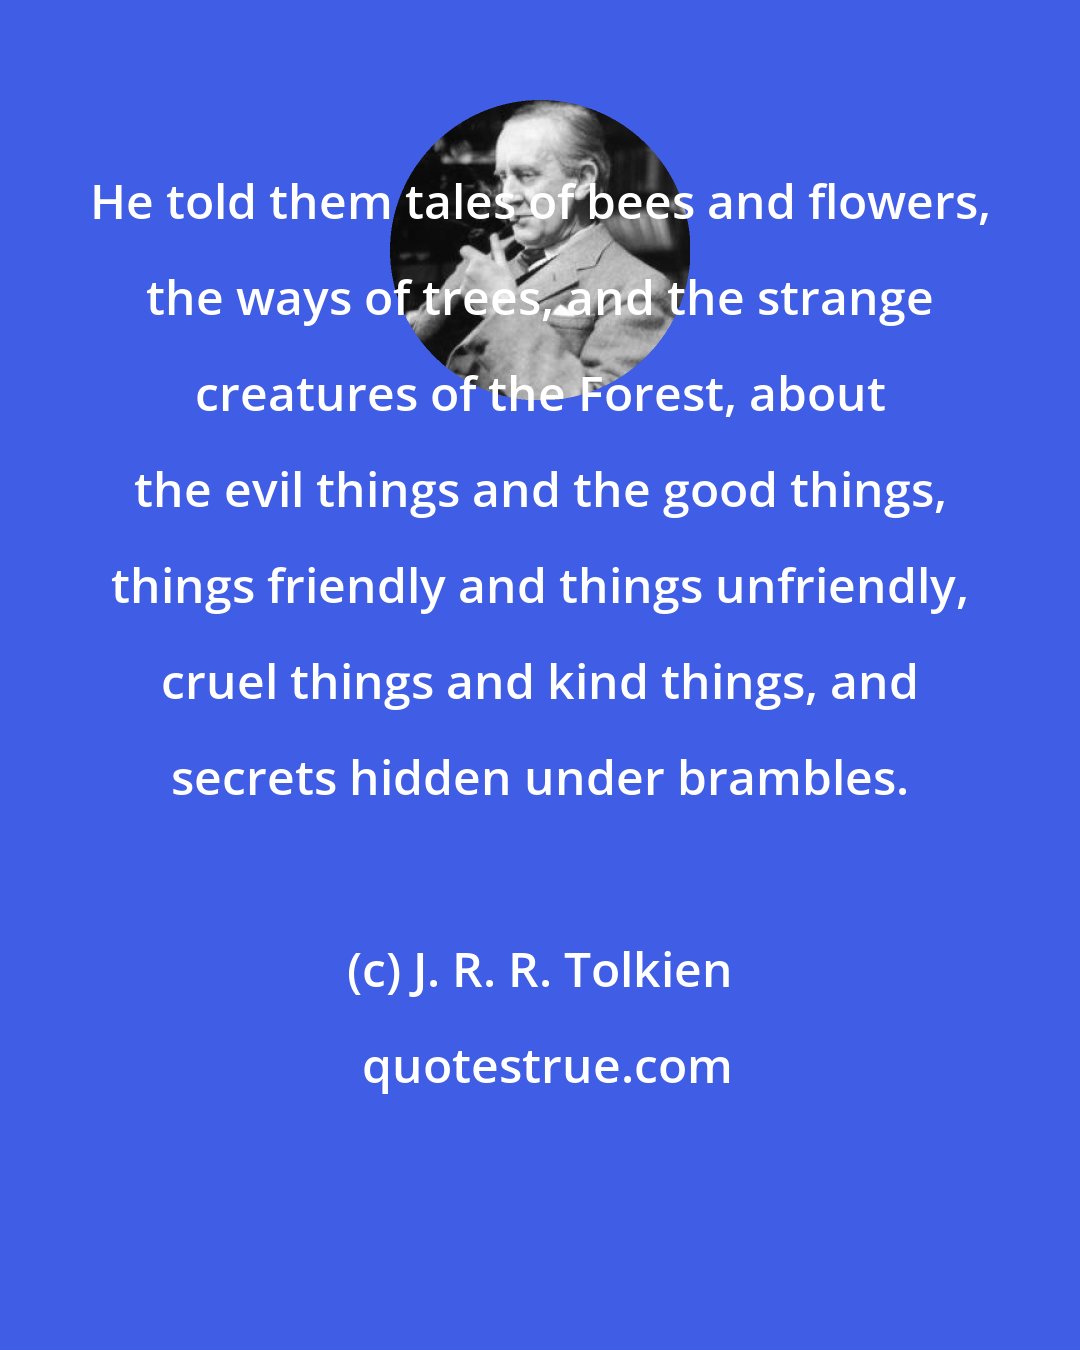 J. R. R. Tolkien: He told them tales of bees and flowers, the ways of trees, and the strange creatures of the Forest, about the evil things and the good things, things friendly and things unfriendly, cruel things and kind things, and secrets hidden under brambles.